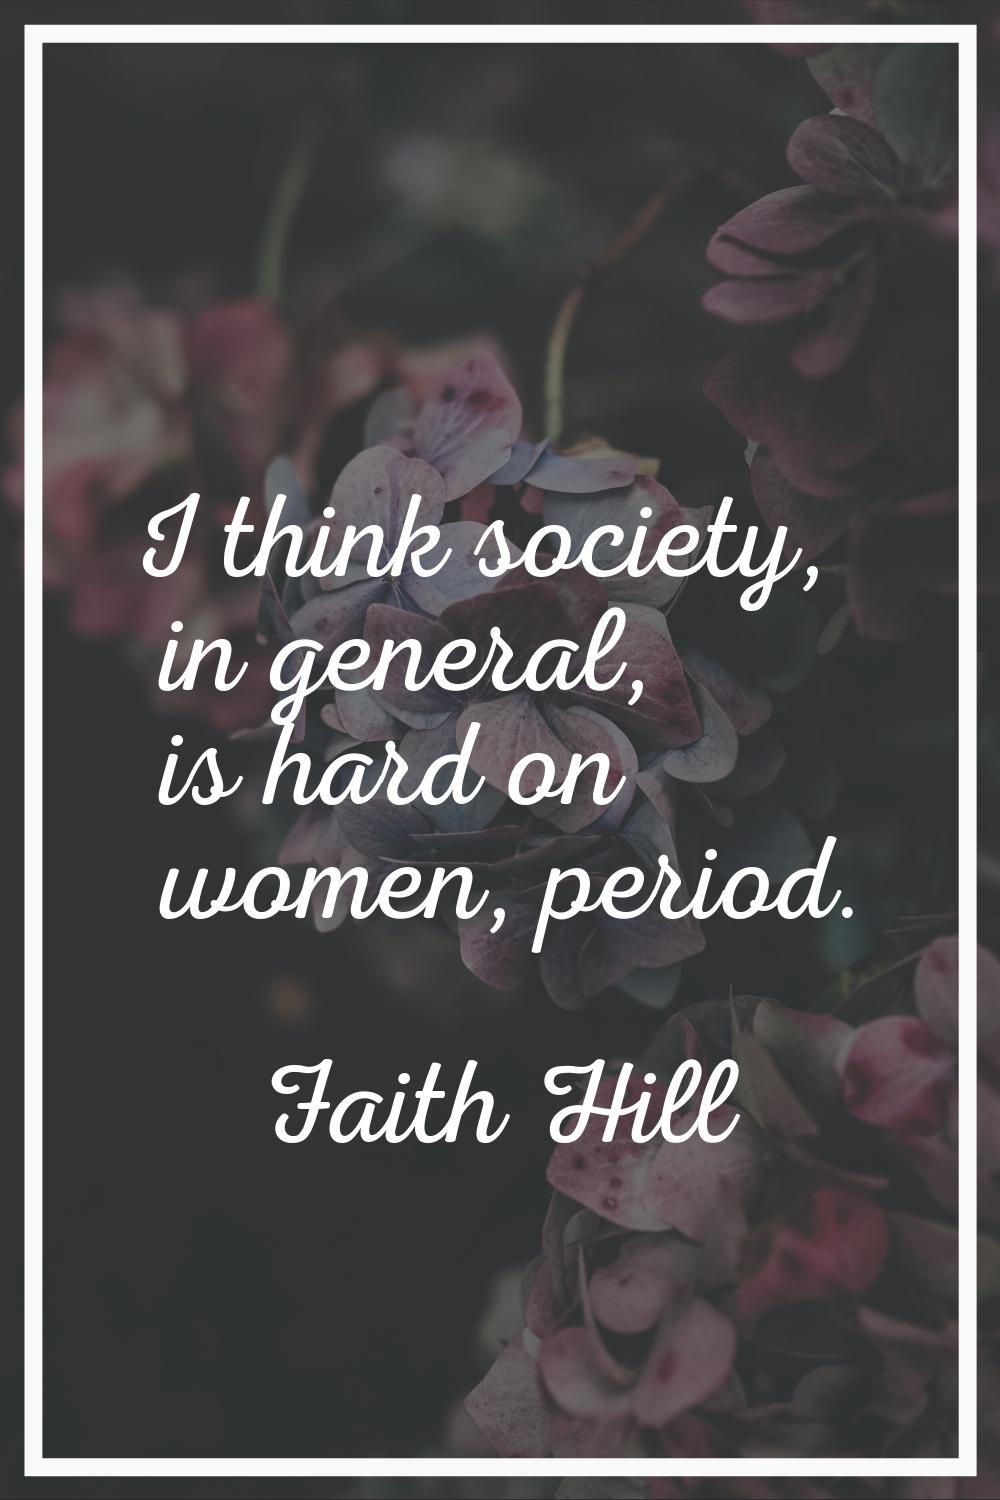 I think society, in general, is hard on women, period.